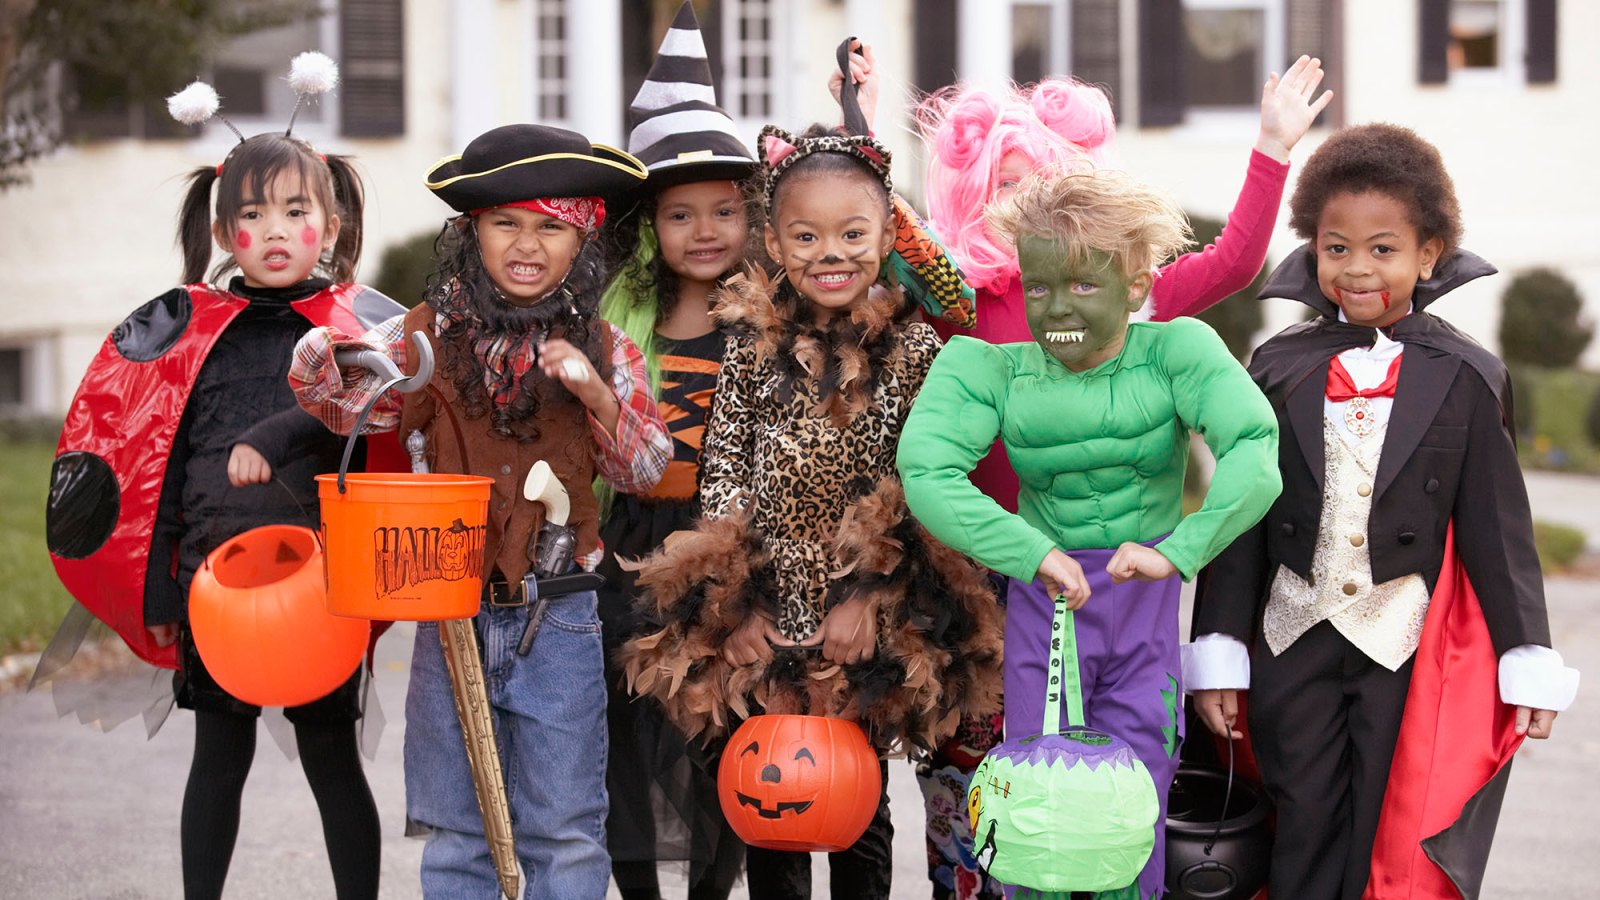 The Most Adorable Children's Halloween Costumes on